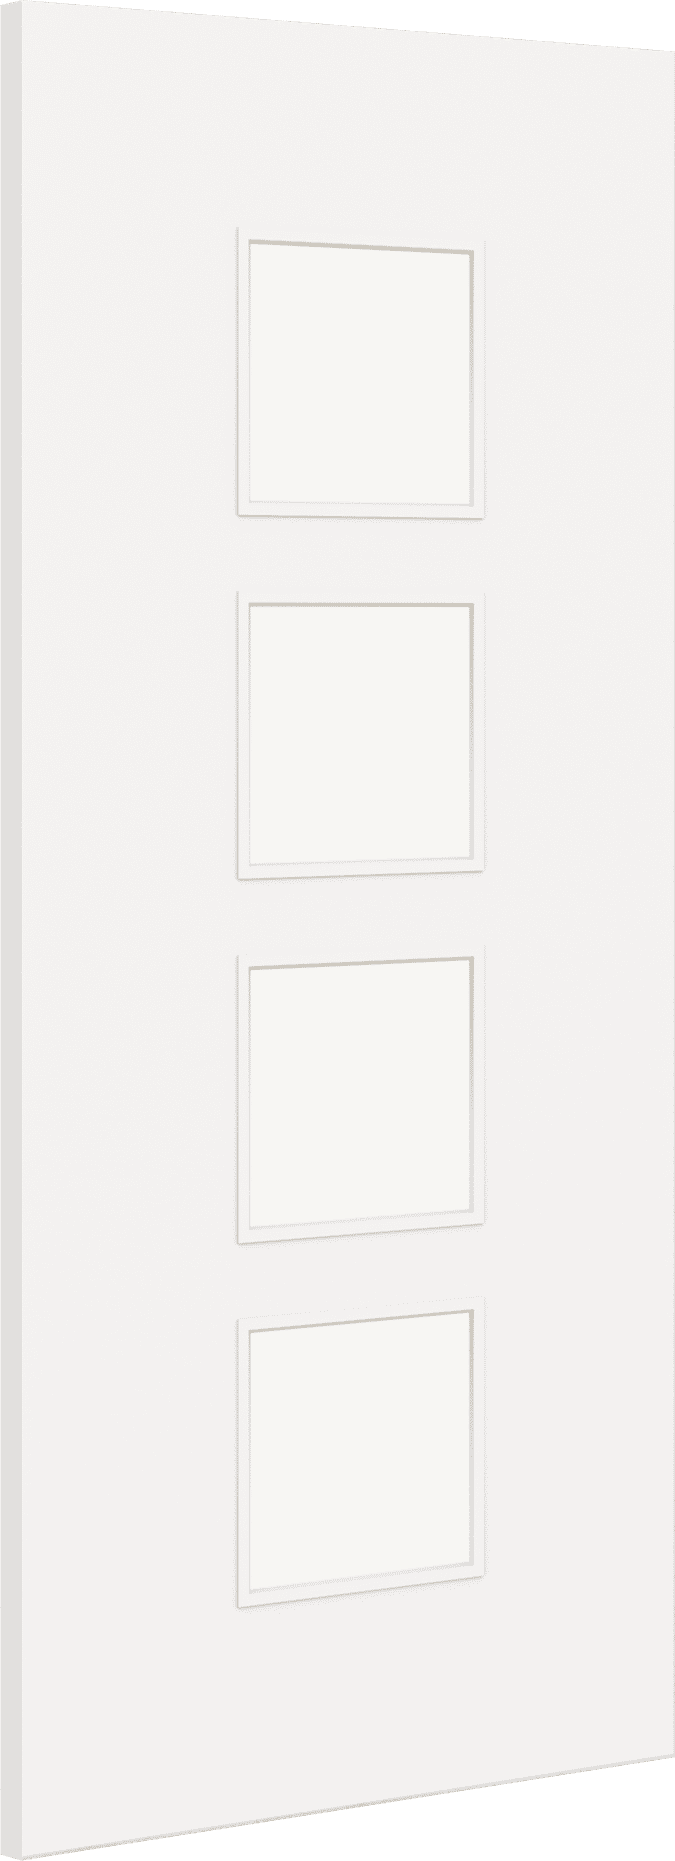 1981mm x 686mm x 44mm (27") Architectural Paint Grade White 09 Frosted Glazed Fire Door Blank